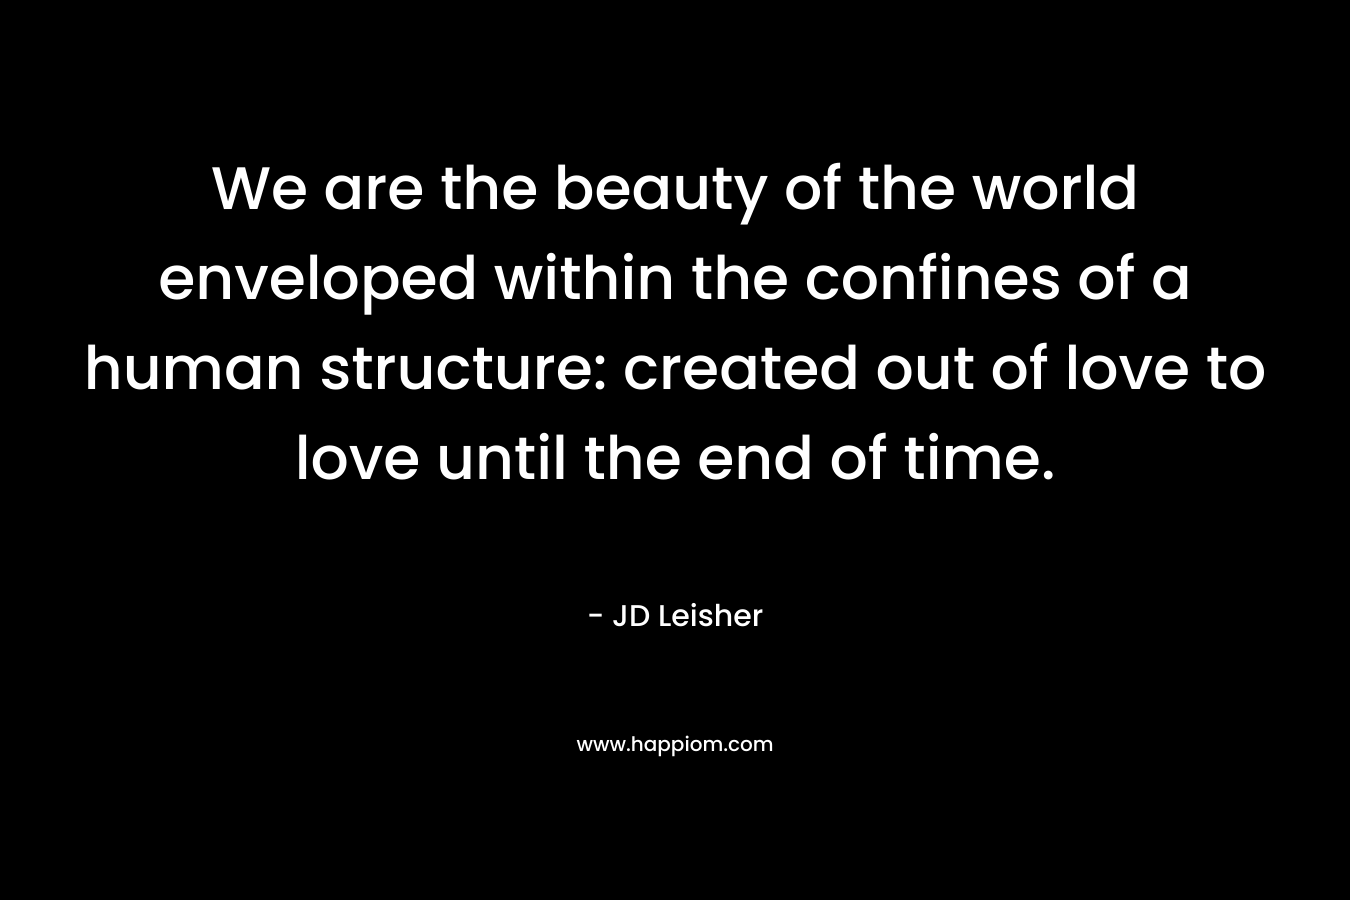 We are the beauty of the world enveloped within the confines of a human structure: created out of love to love until the end of time. – JD Leisher